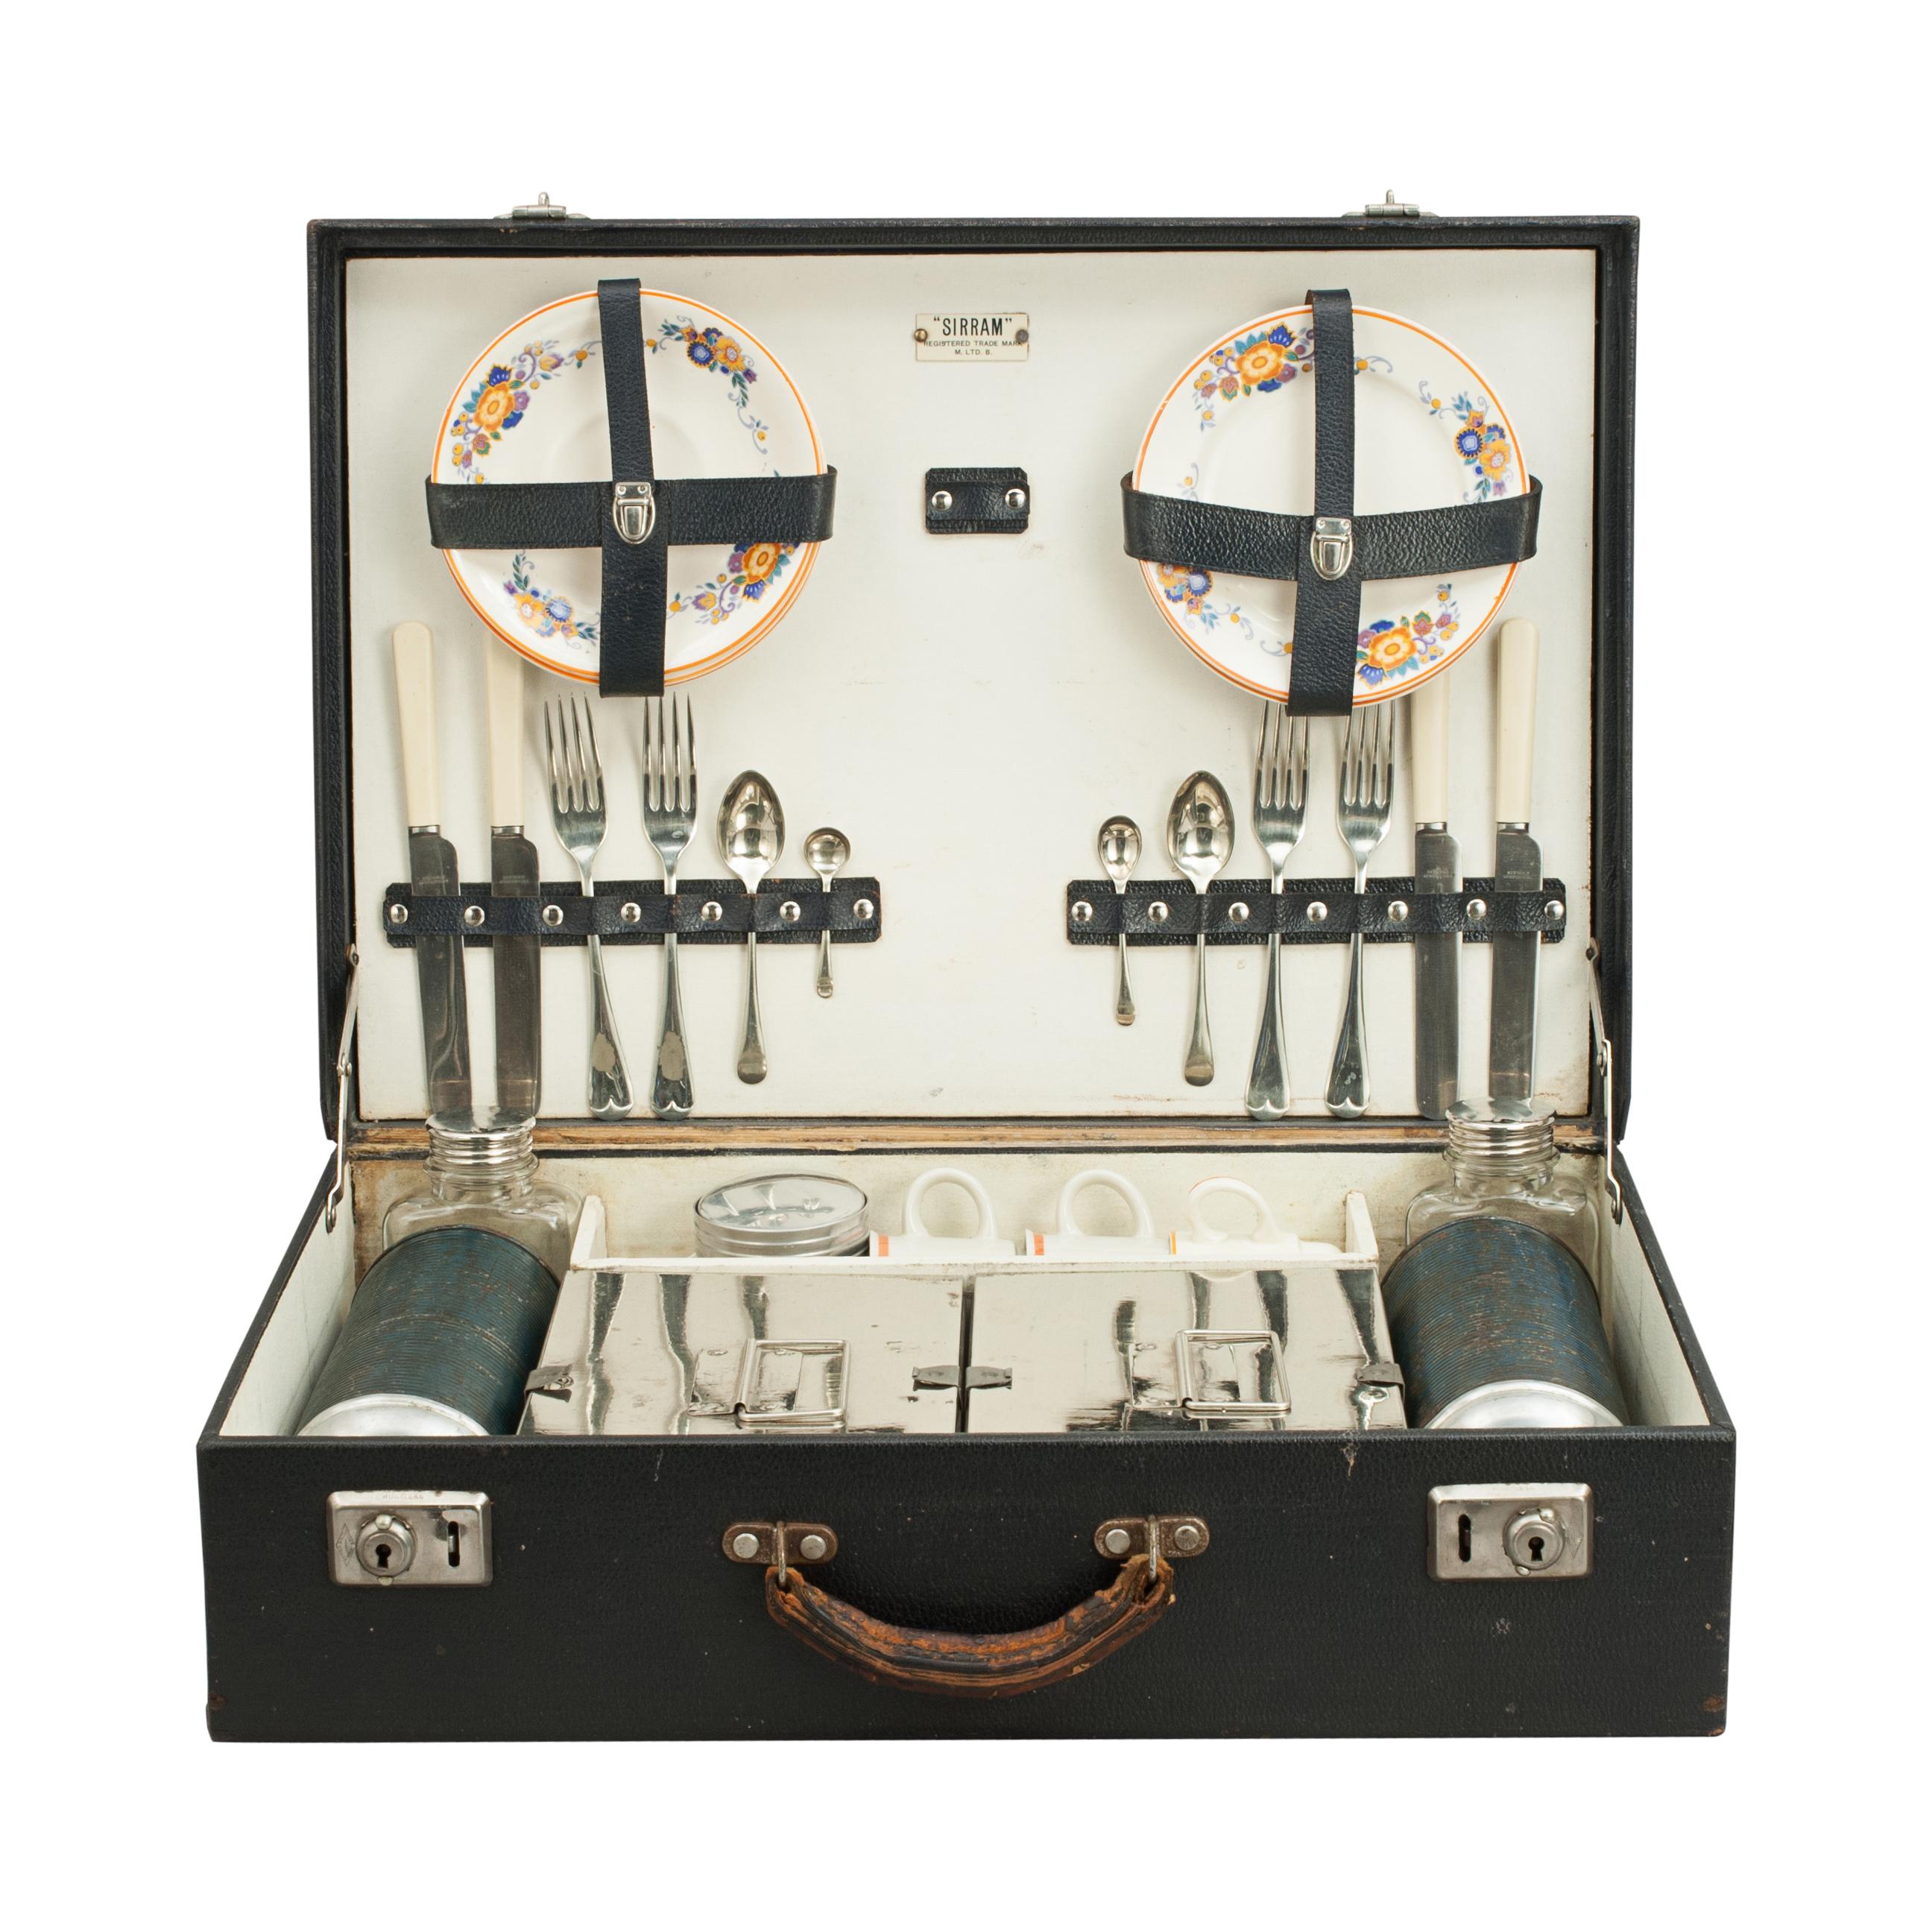 A great mid-20th century four-person picnic set in a carry case. The wooden carcus is covered in black cloth with two nickel-plated locks and catches, the contents in a good neat compact setting, held in place in the lid by leather straps. This is a